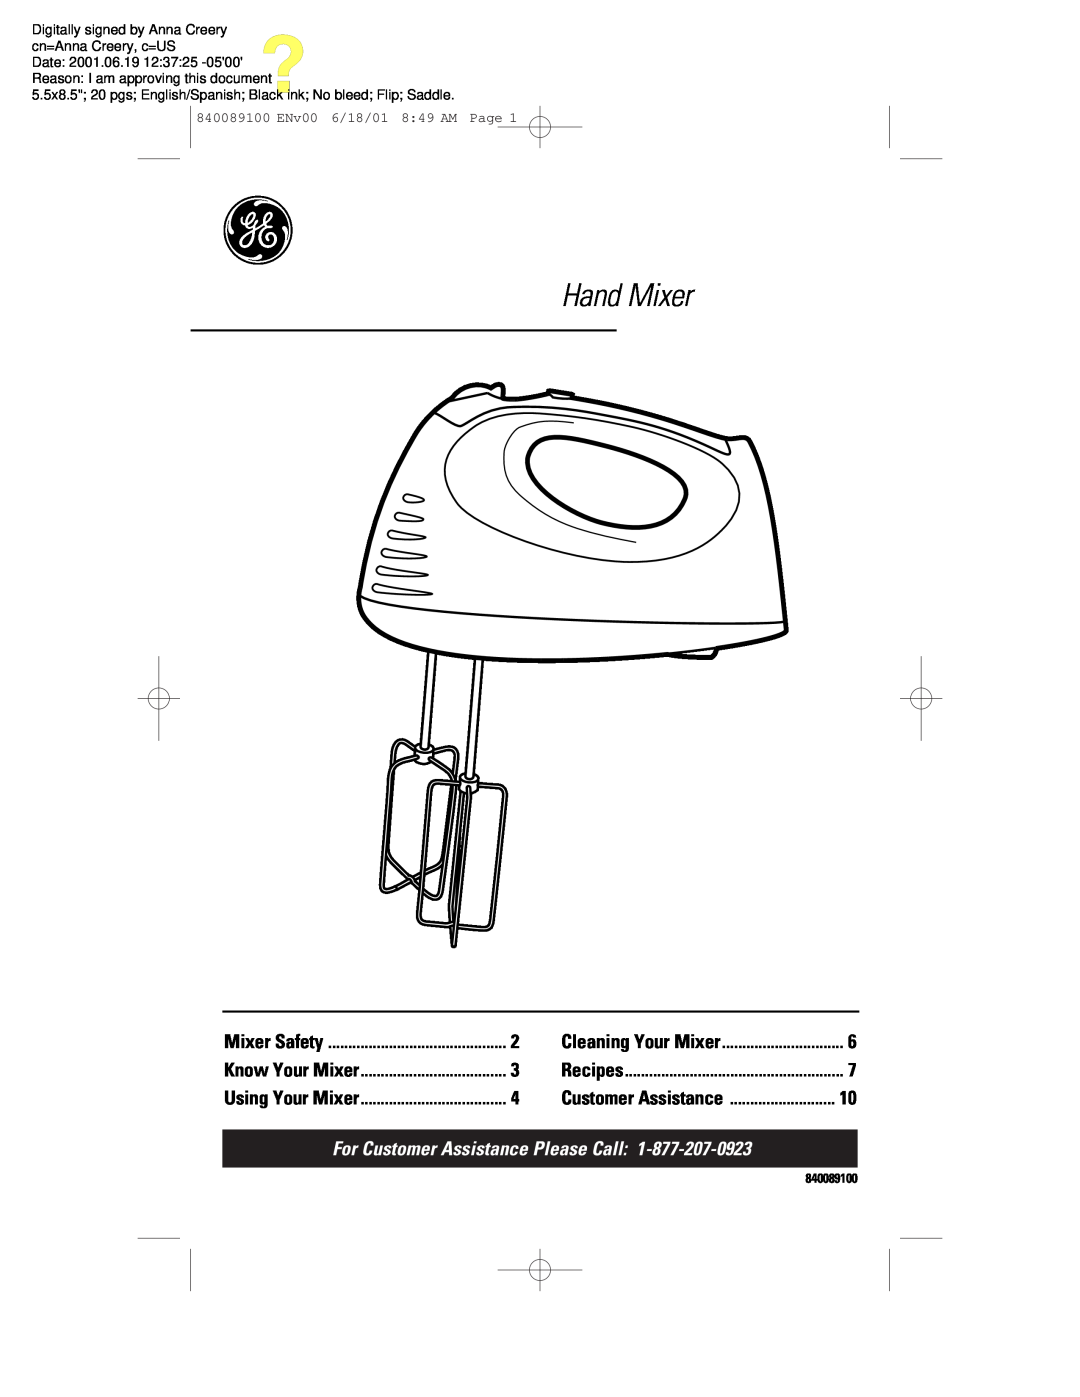 GE 840089100 manual Hand Mixer, For Customer Assistance Please Call, Mixer Safety, Cleaning Your Mixer, Know Your Mixer 